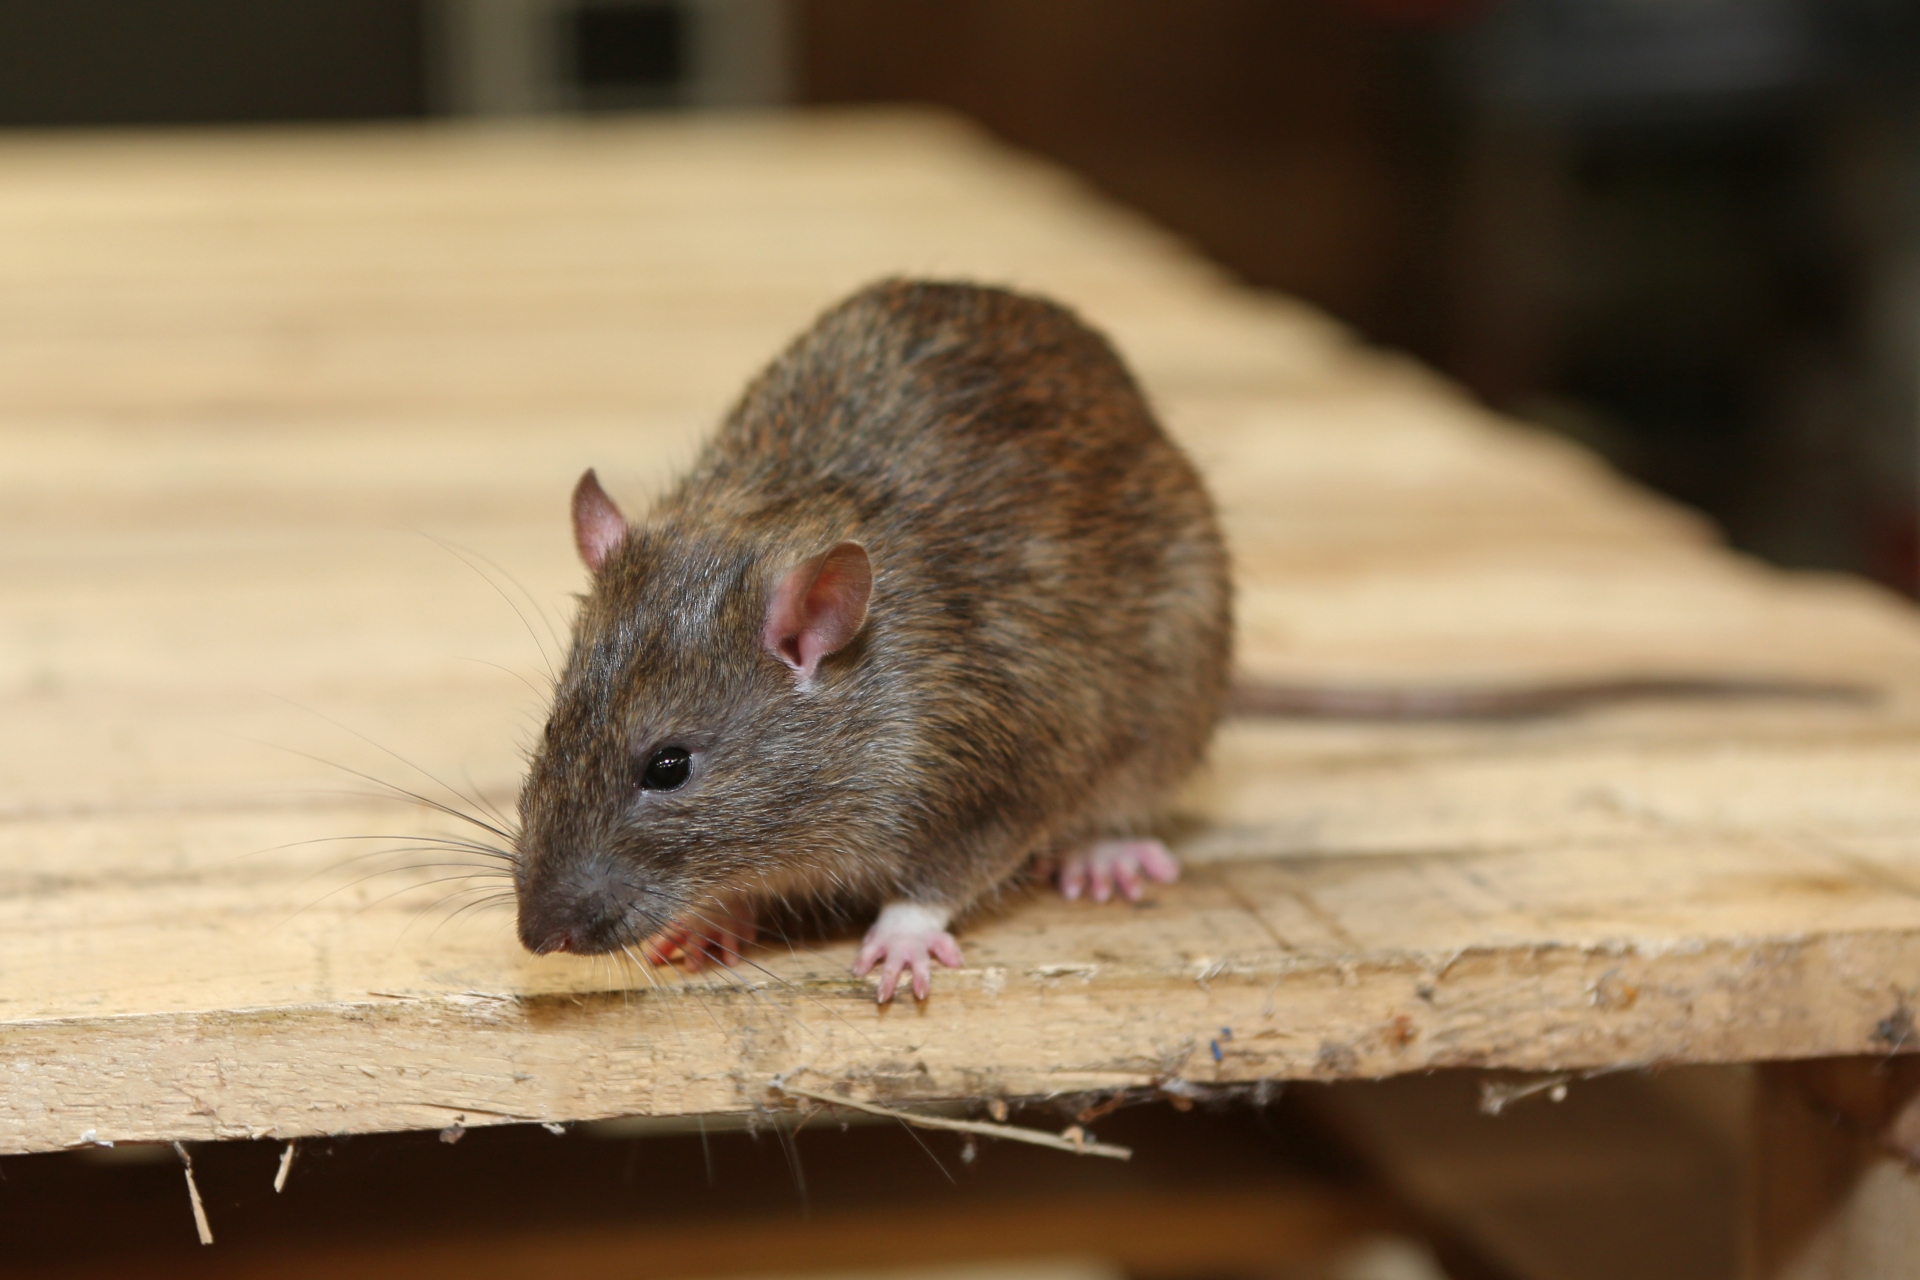 Rat Infestation, Pest Control in Enfield, EN1. Call Now 020 8166 9746